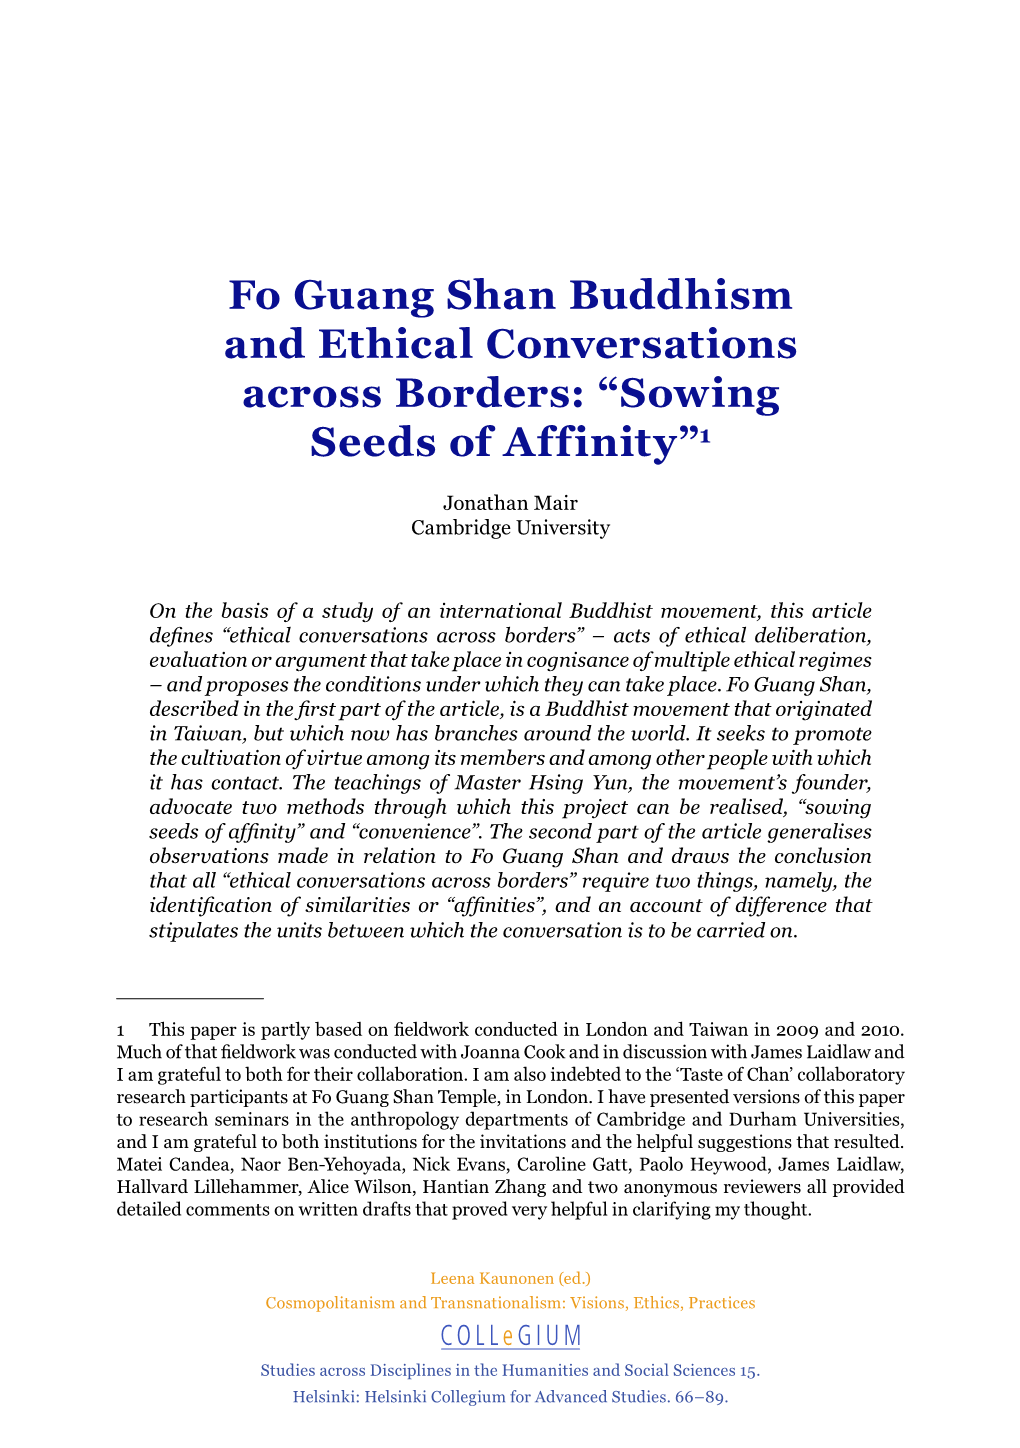 Fo Guang Shan Buddhism and Ethical Conversations Across Borders: “Sowing Seeds of Affinity”1